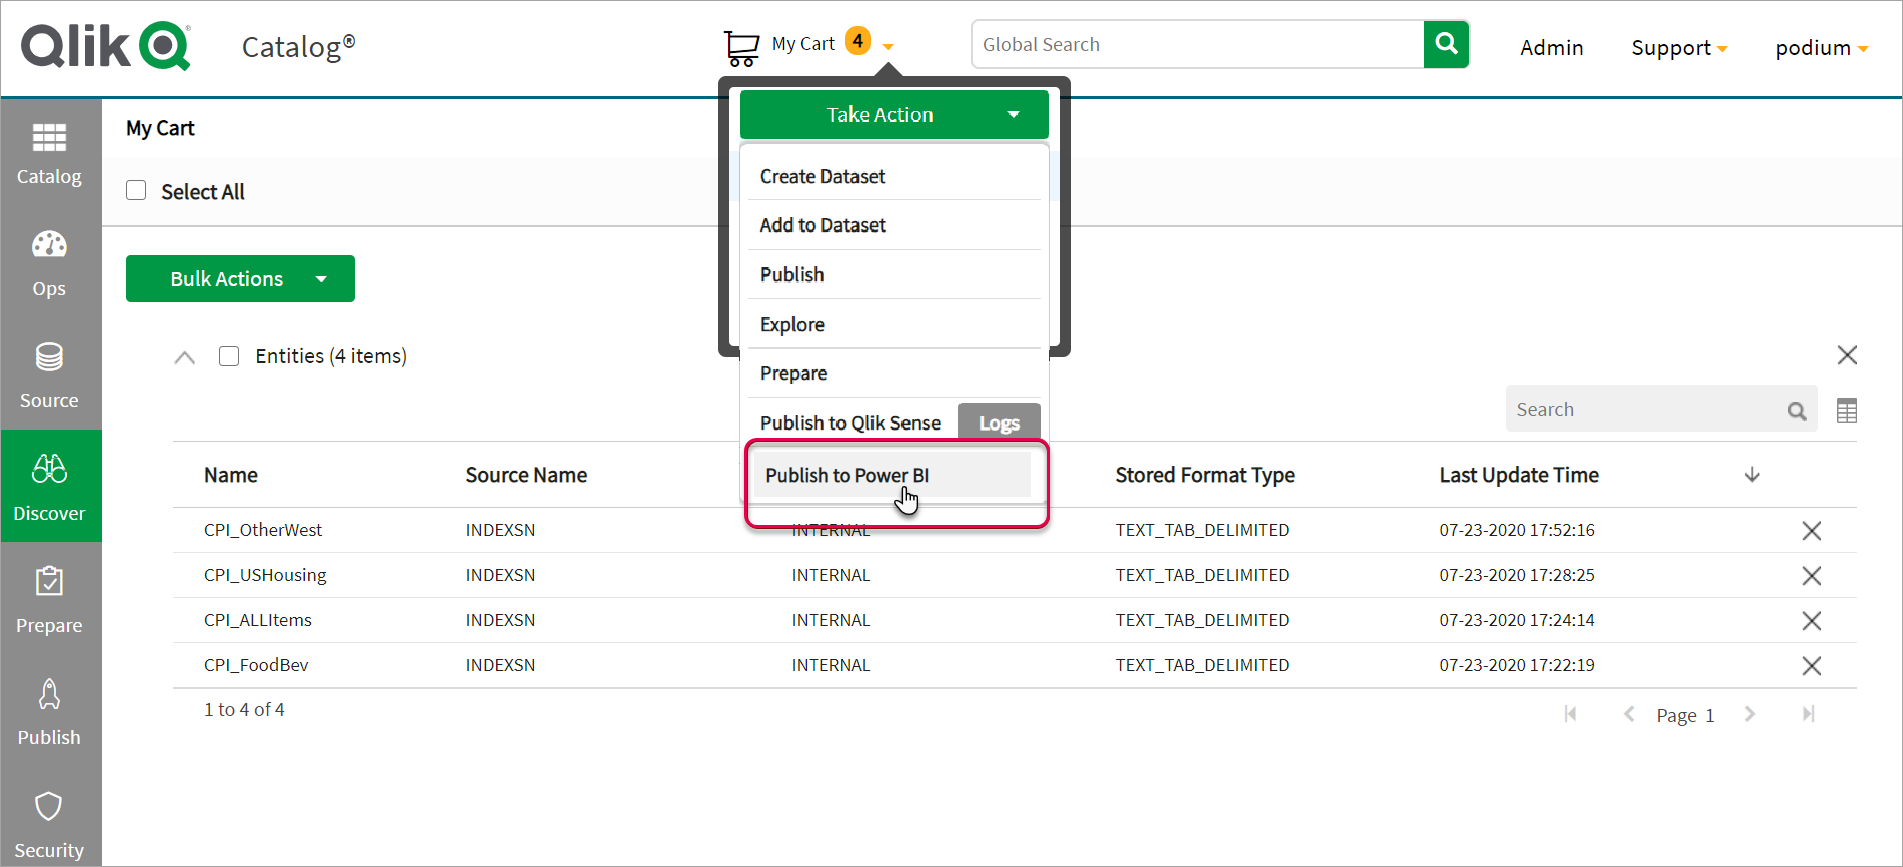 Publish objects to Power BI from Cart